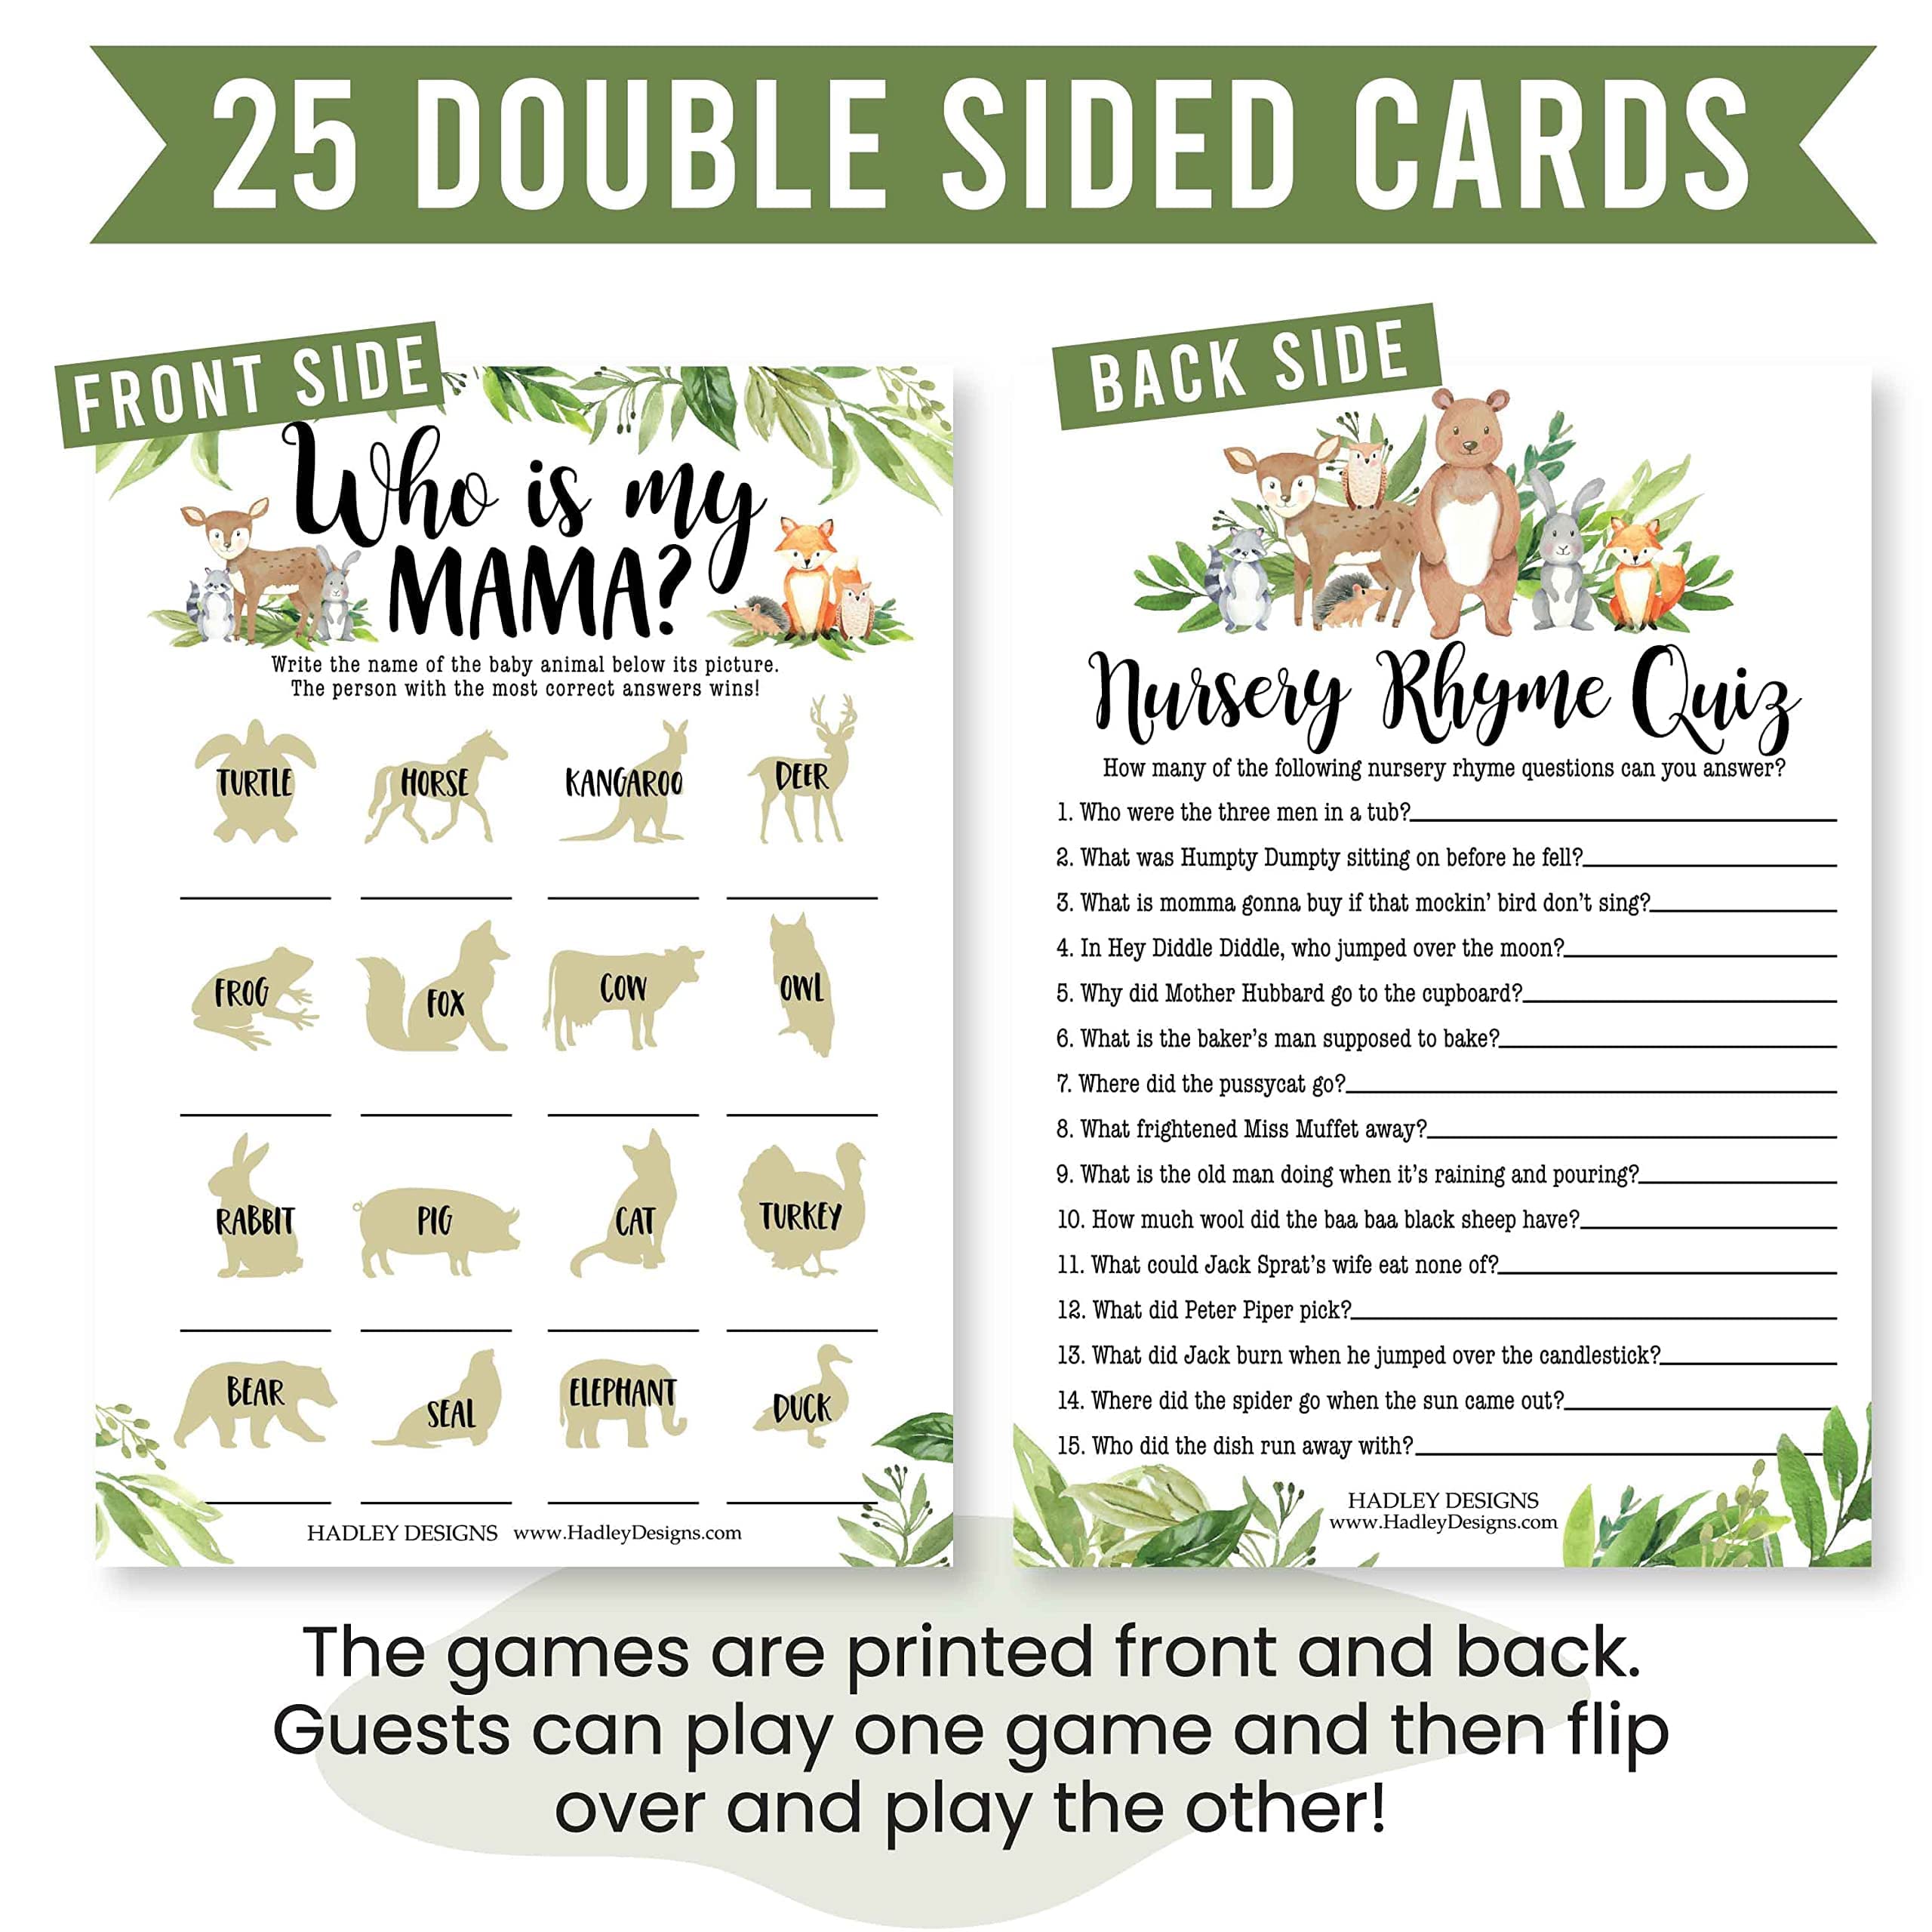 25 Woodland Animal Matching, 25 Nursery Rhyme Game, 25 Word Scramble For Baby Shower, 25 True Or False Game, 25 Who Knows Mommy Best, 25 Baby Prediction And Advice Cards - 6 Double Sided Cards